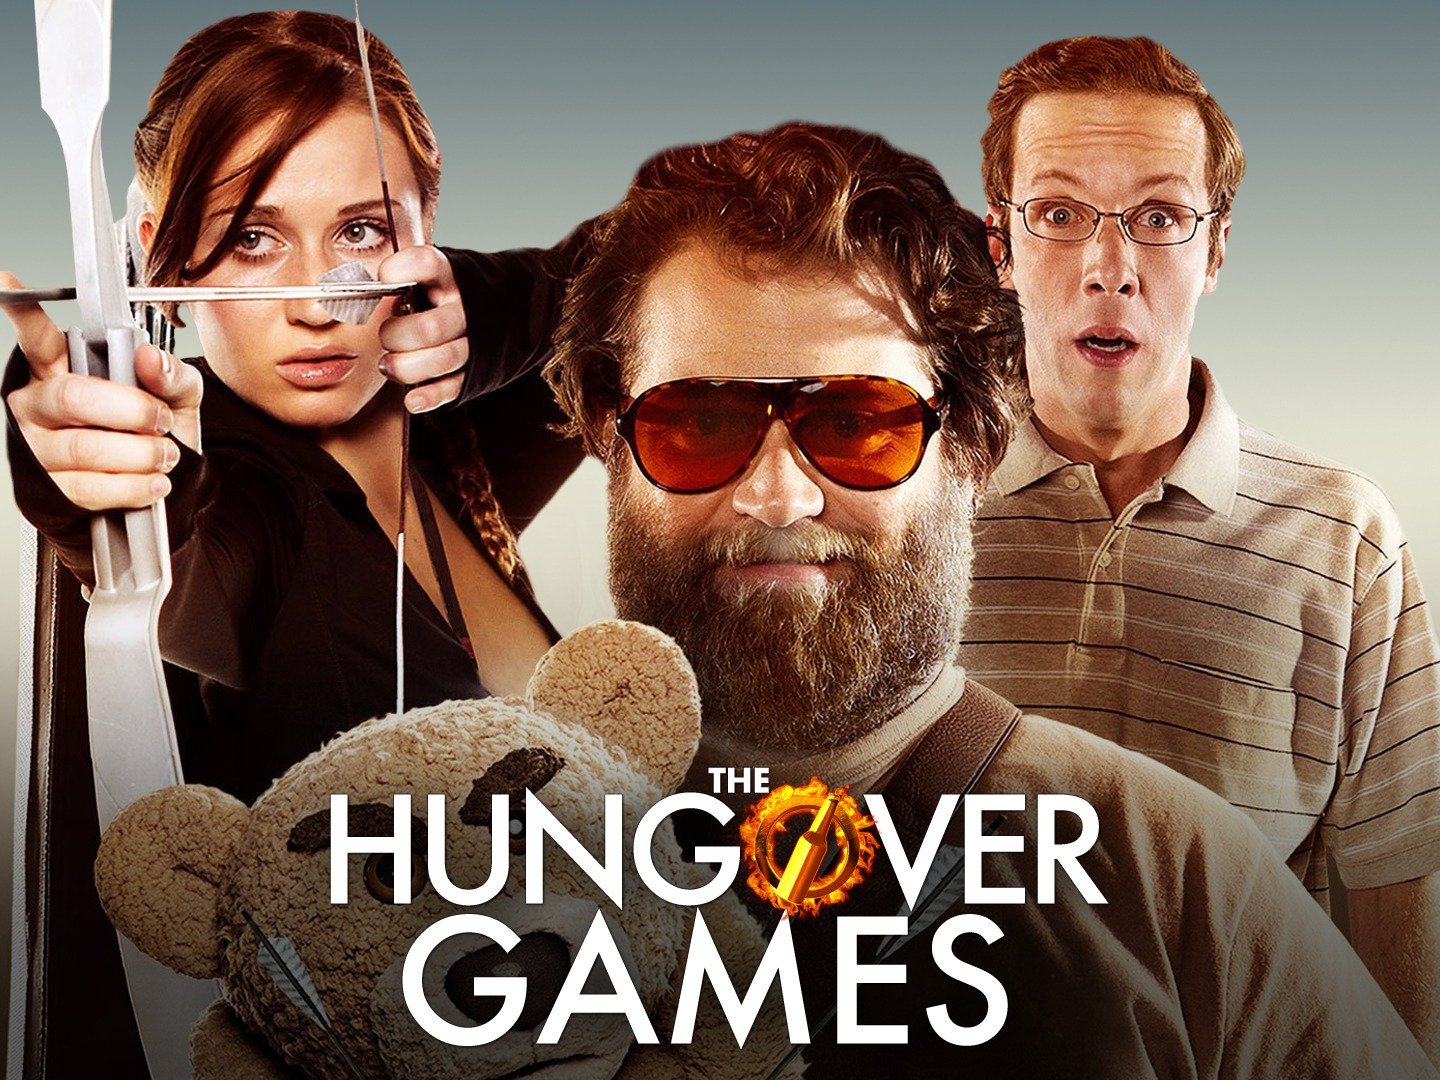 The Hungover Games Full Movie